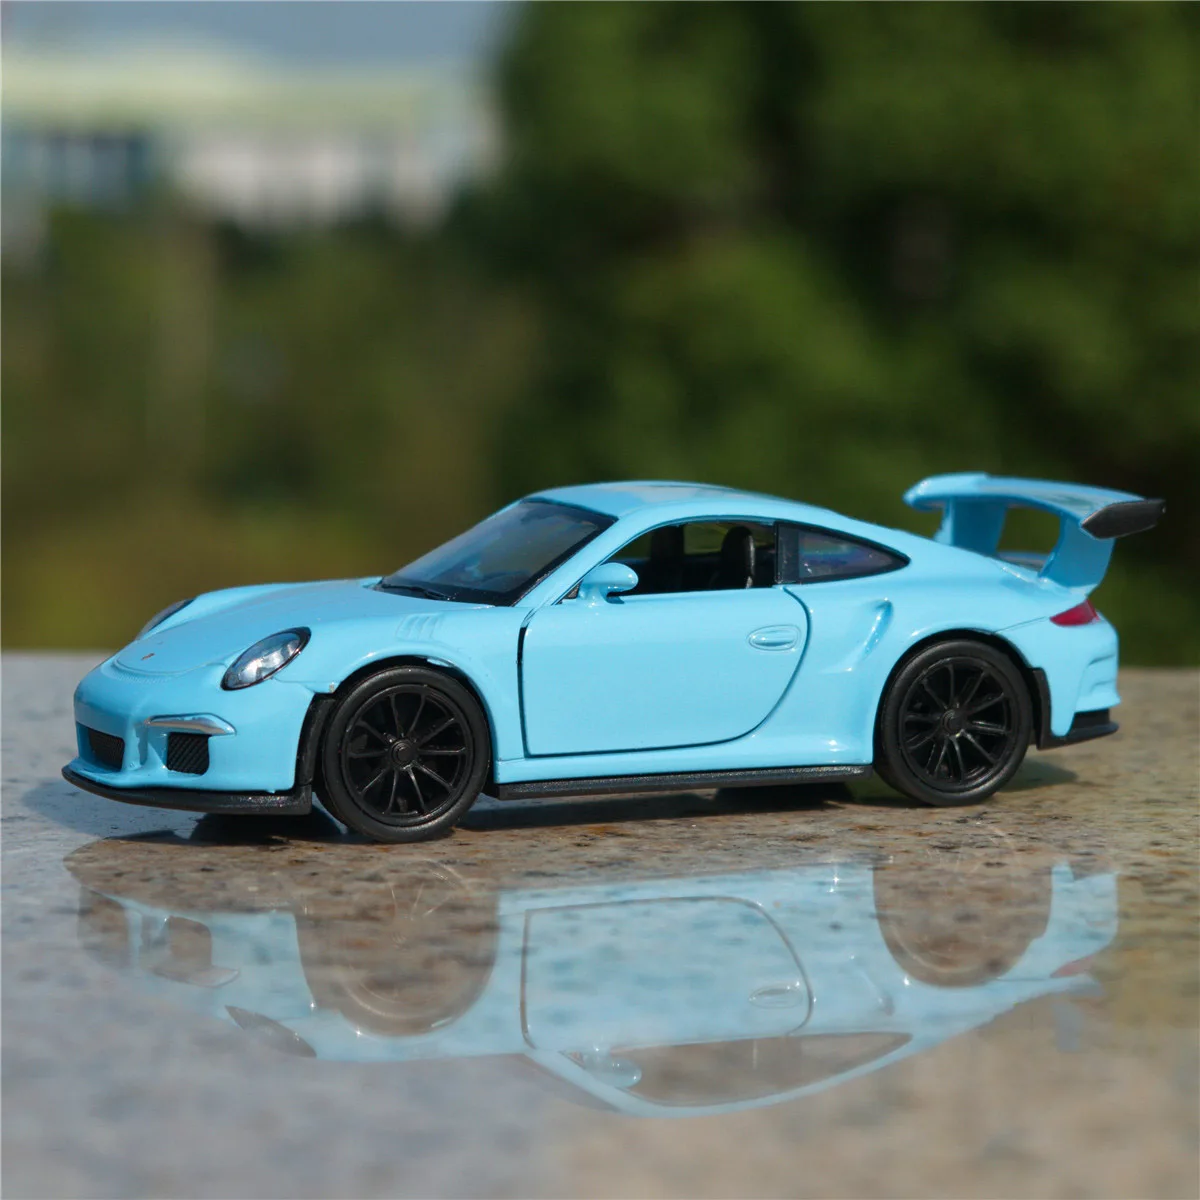 

WELLY 1:36 2016 Porsche 911 GT3 RS Alloy Sports Car Model Diecasts Metal Toy Car Vehicles Model Pull Back Simulation Kids Gifts